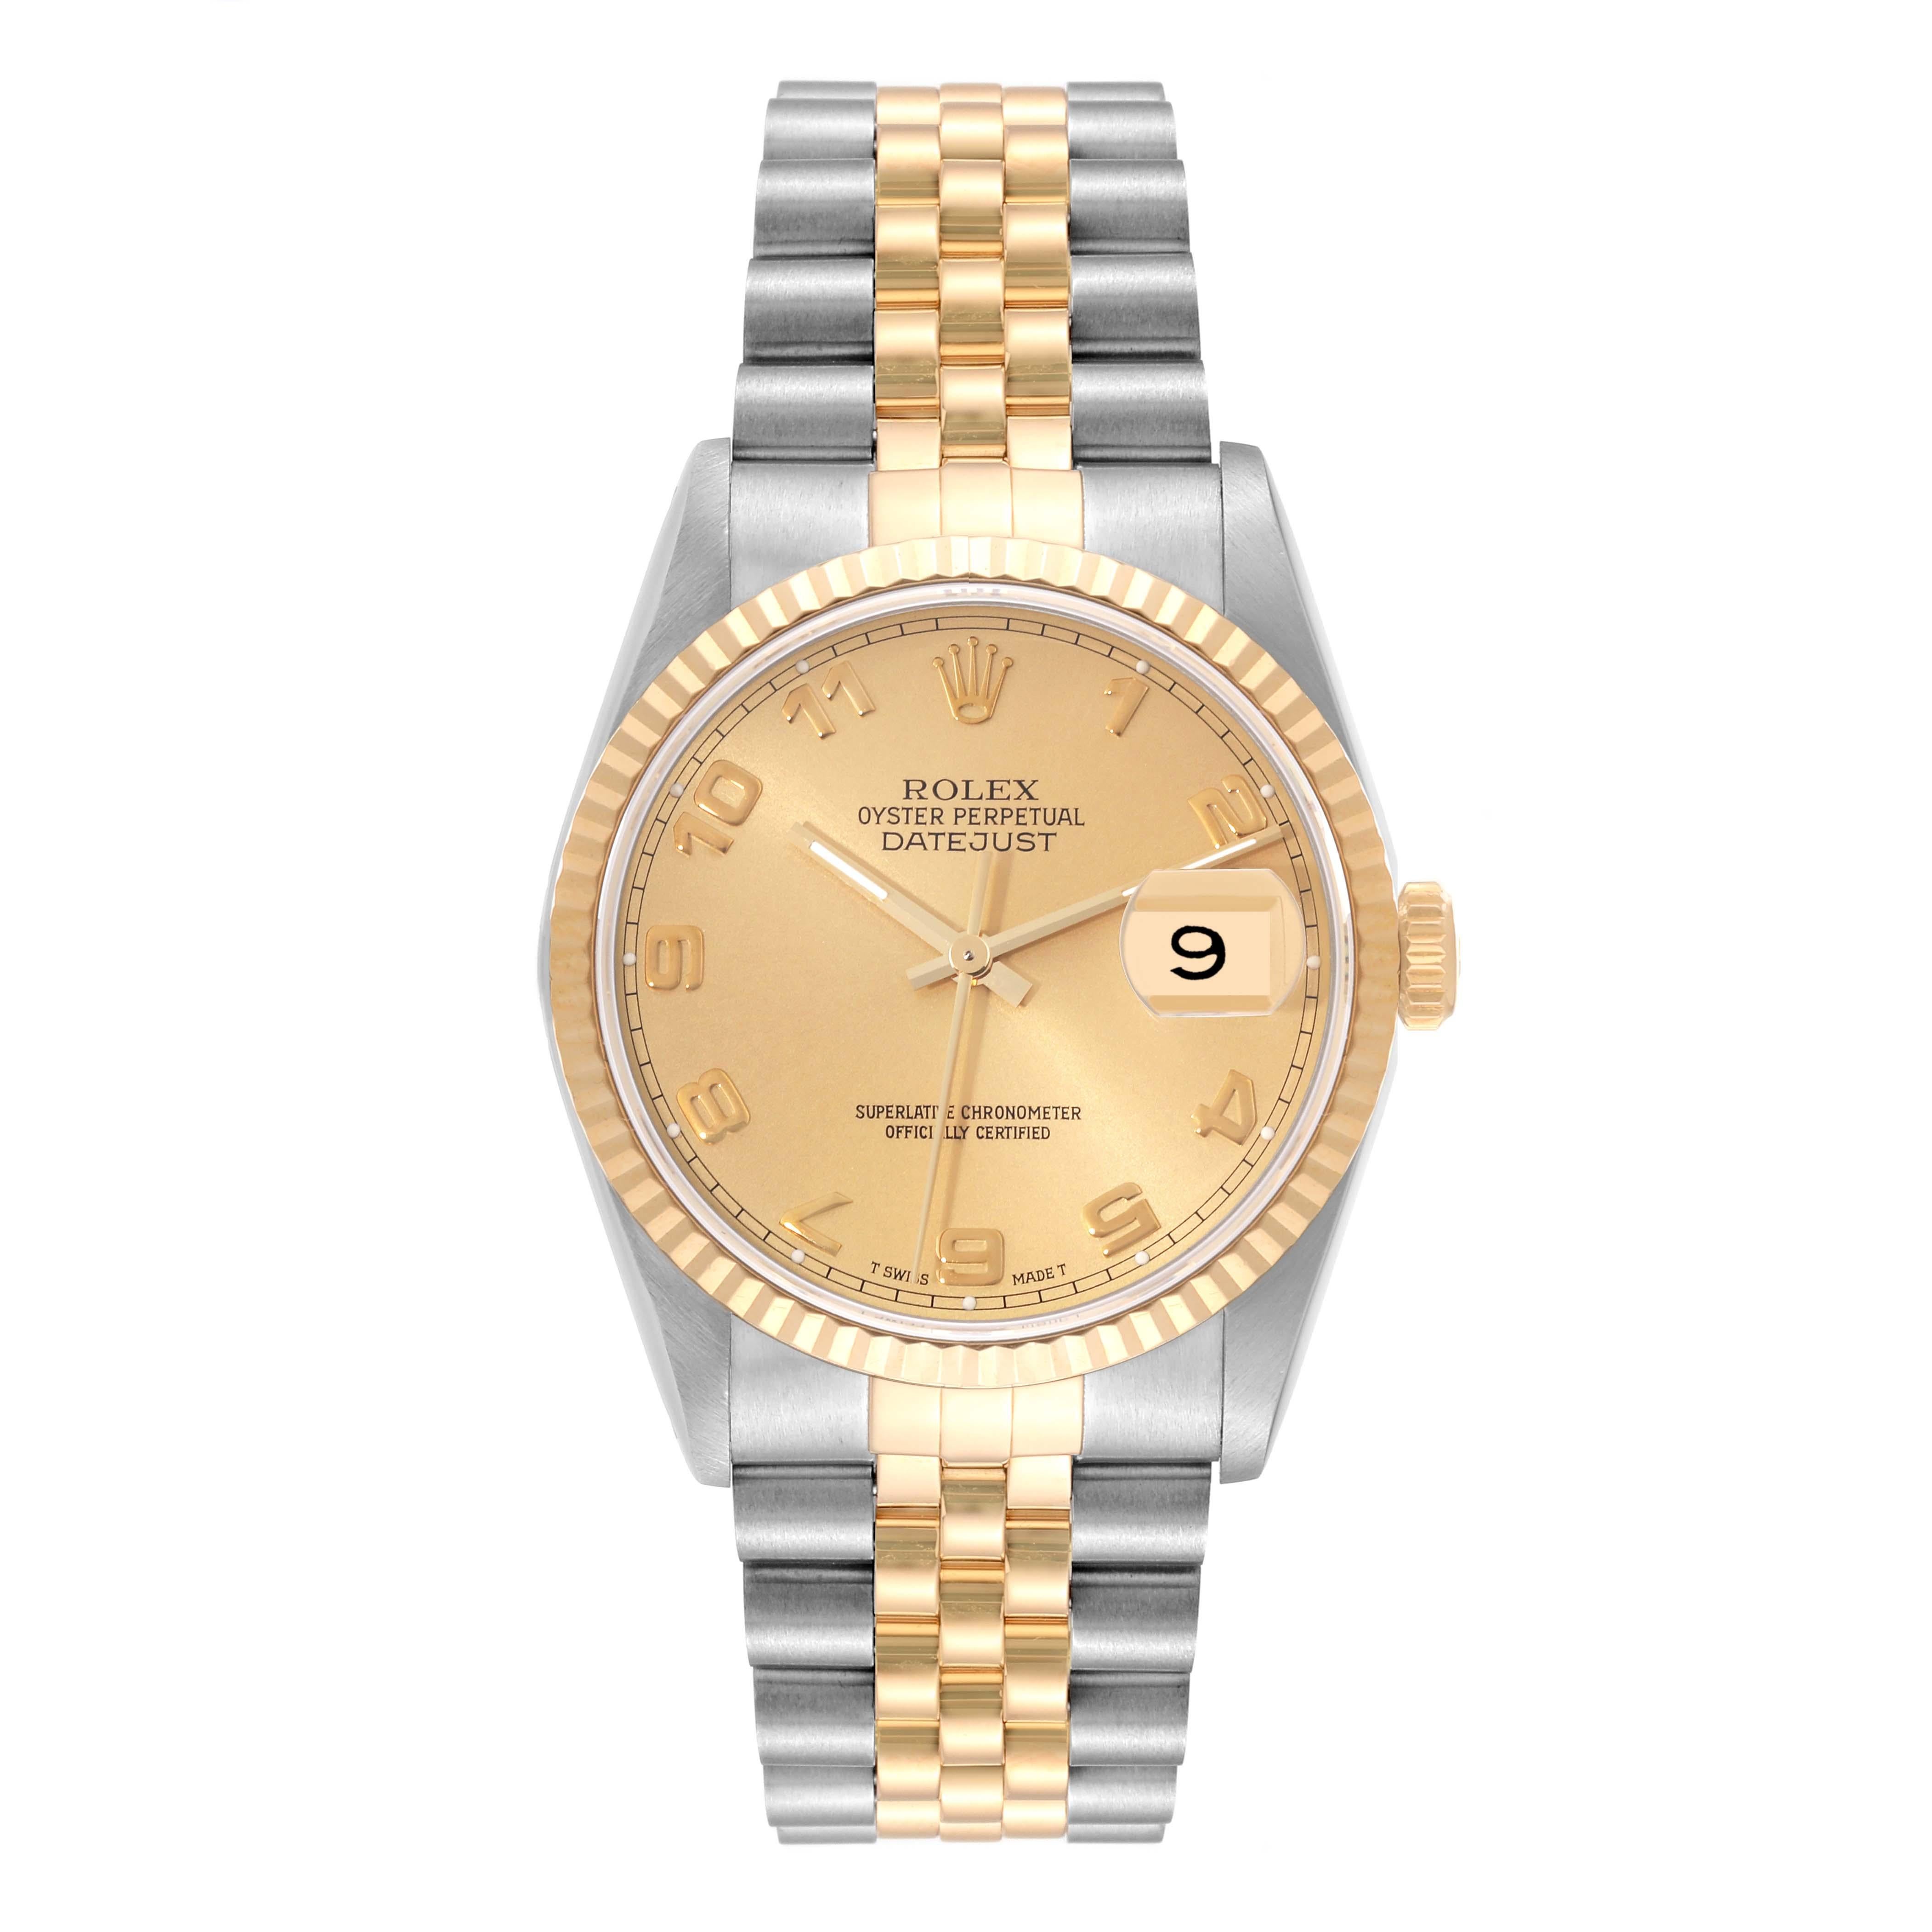 Rolex Datejust Steel Yellow Gold Champagne Arabic Dial Watch 16233 Box Papers. Officially certified chronometer automatic self-winding movement. Stainless steel case 36.0 mm in diameter. Rolex logo on a crown. 18k yellow gold fluted bezel. Scratch